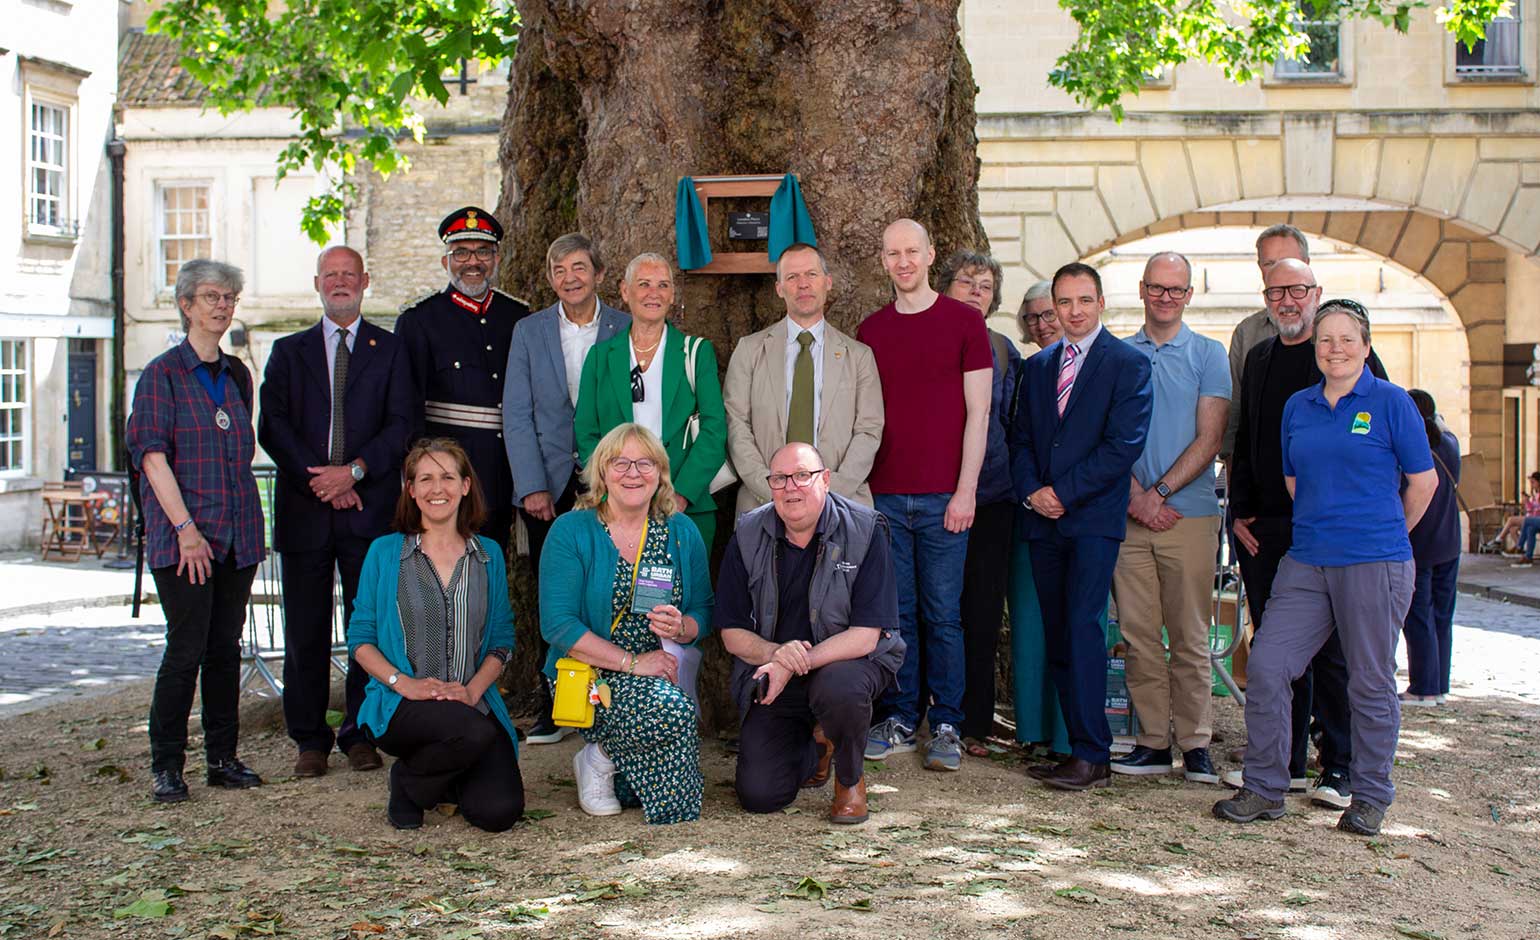 Special identification plaque unveiled on Abbey Green tree